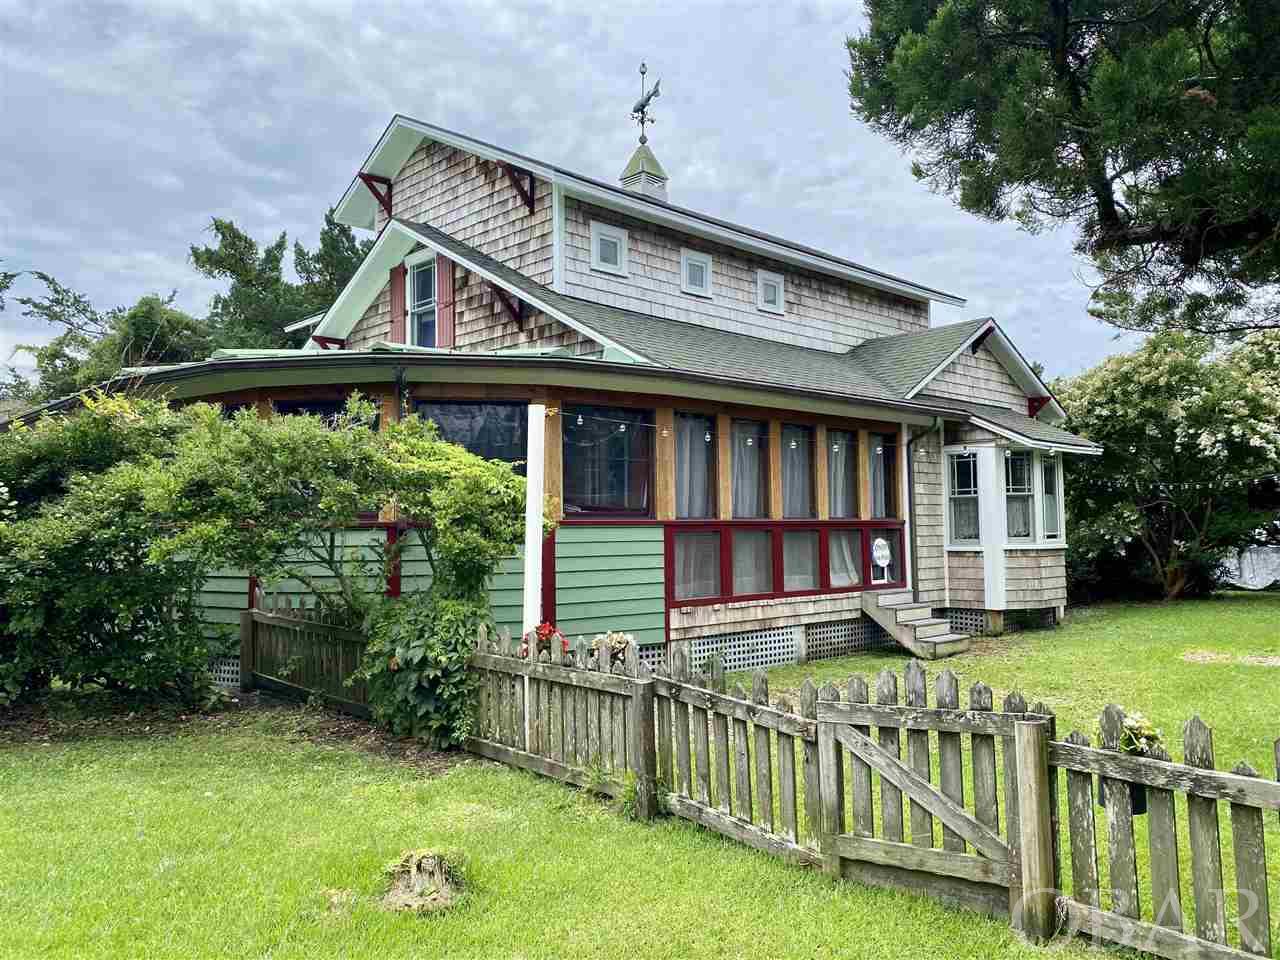 This exceptional property is located in the heart of the village, close walking distance to shops and restaurants.  The parcel contains 2 houses; the primary craftsman style home was originally built by Bertha and Van Henry O'Neal in '45 using materials from their Portsmouth island home as well as other defunct historic structures on the island adding to it's rich history.  A complete remodel was done by local contractors including descendants of original owners in 2004 resulting in a perfect balance of historic beauty and modern comfort. The downstairs consists of mud room/work space, kitchen, dining, living, bonus room, bedroom, full bath and large, enclosed and fully insulated wrap porch or sun room with removable panels allowing for conversion to screen porch.  Upstairs houses the master bed and bath in addition to a large open dressing room, work space with laundry facility.  Wooden beaded boards throughout entire house, vintage English stained glass accent panels built into doors, windows and walls, prairie glass mission style Pella windows and doors, , Koehler  soaking tub in master and farm sink in mudroom, on demand gas hot water, all new kitchen and appliances 2020, new HVAC 2020, custom vintage style faux "coal burning" gas fireplace insert in dining with art nouveau tiles, house fully wired for sound and cable, custom California Closet systems in master dressing room and walk in kitchen pantry and easy install, highly effective full storm shield shutter system for both houses.  Fenced in yard, large private outdoor shower and bike racks complete the package. "Charlotte's Daughter" is the 2nd cottage on the property which has been in a vacation rental  program since 2008 and has provided solid, consistent rental income.  The 2 story cottage was built by local contractor Larry Ihle for his mother in 1987 and is approx 790 square feet along with an 8 X 14' screened porch.  Open kitchen, living dining on first floor, master bed and bath on second floor. Lots of options here as there is potential for double income or the ability to generate income while maintaining exclusive use of one unit.  Both structures meticulously maintained and embellished with beautiful customized landscaping make this property highly desirable on so many levels.